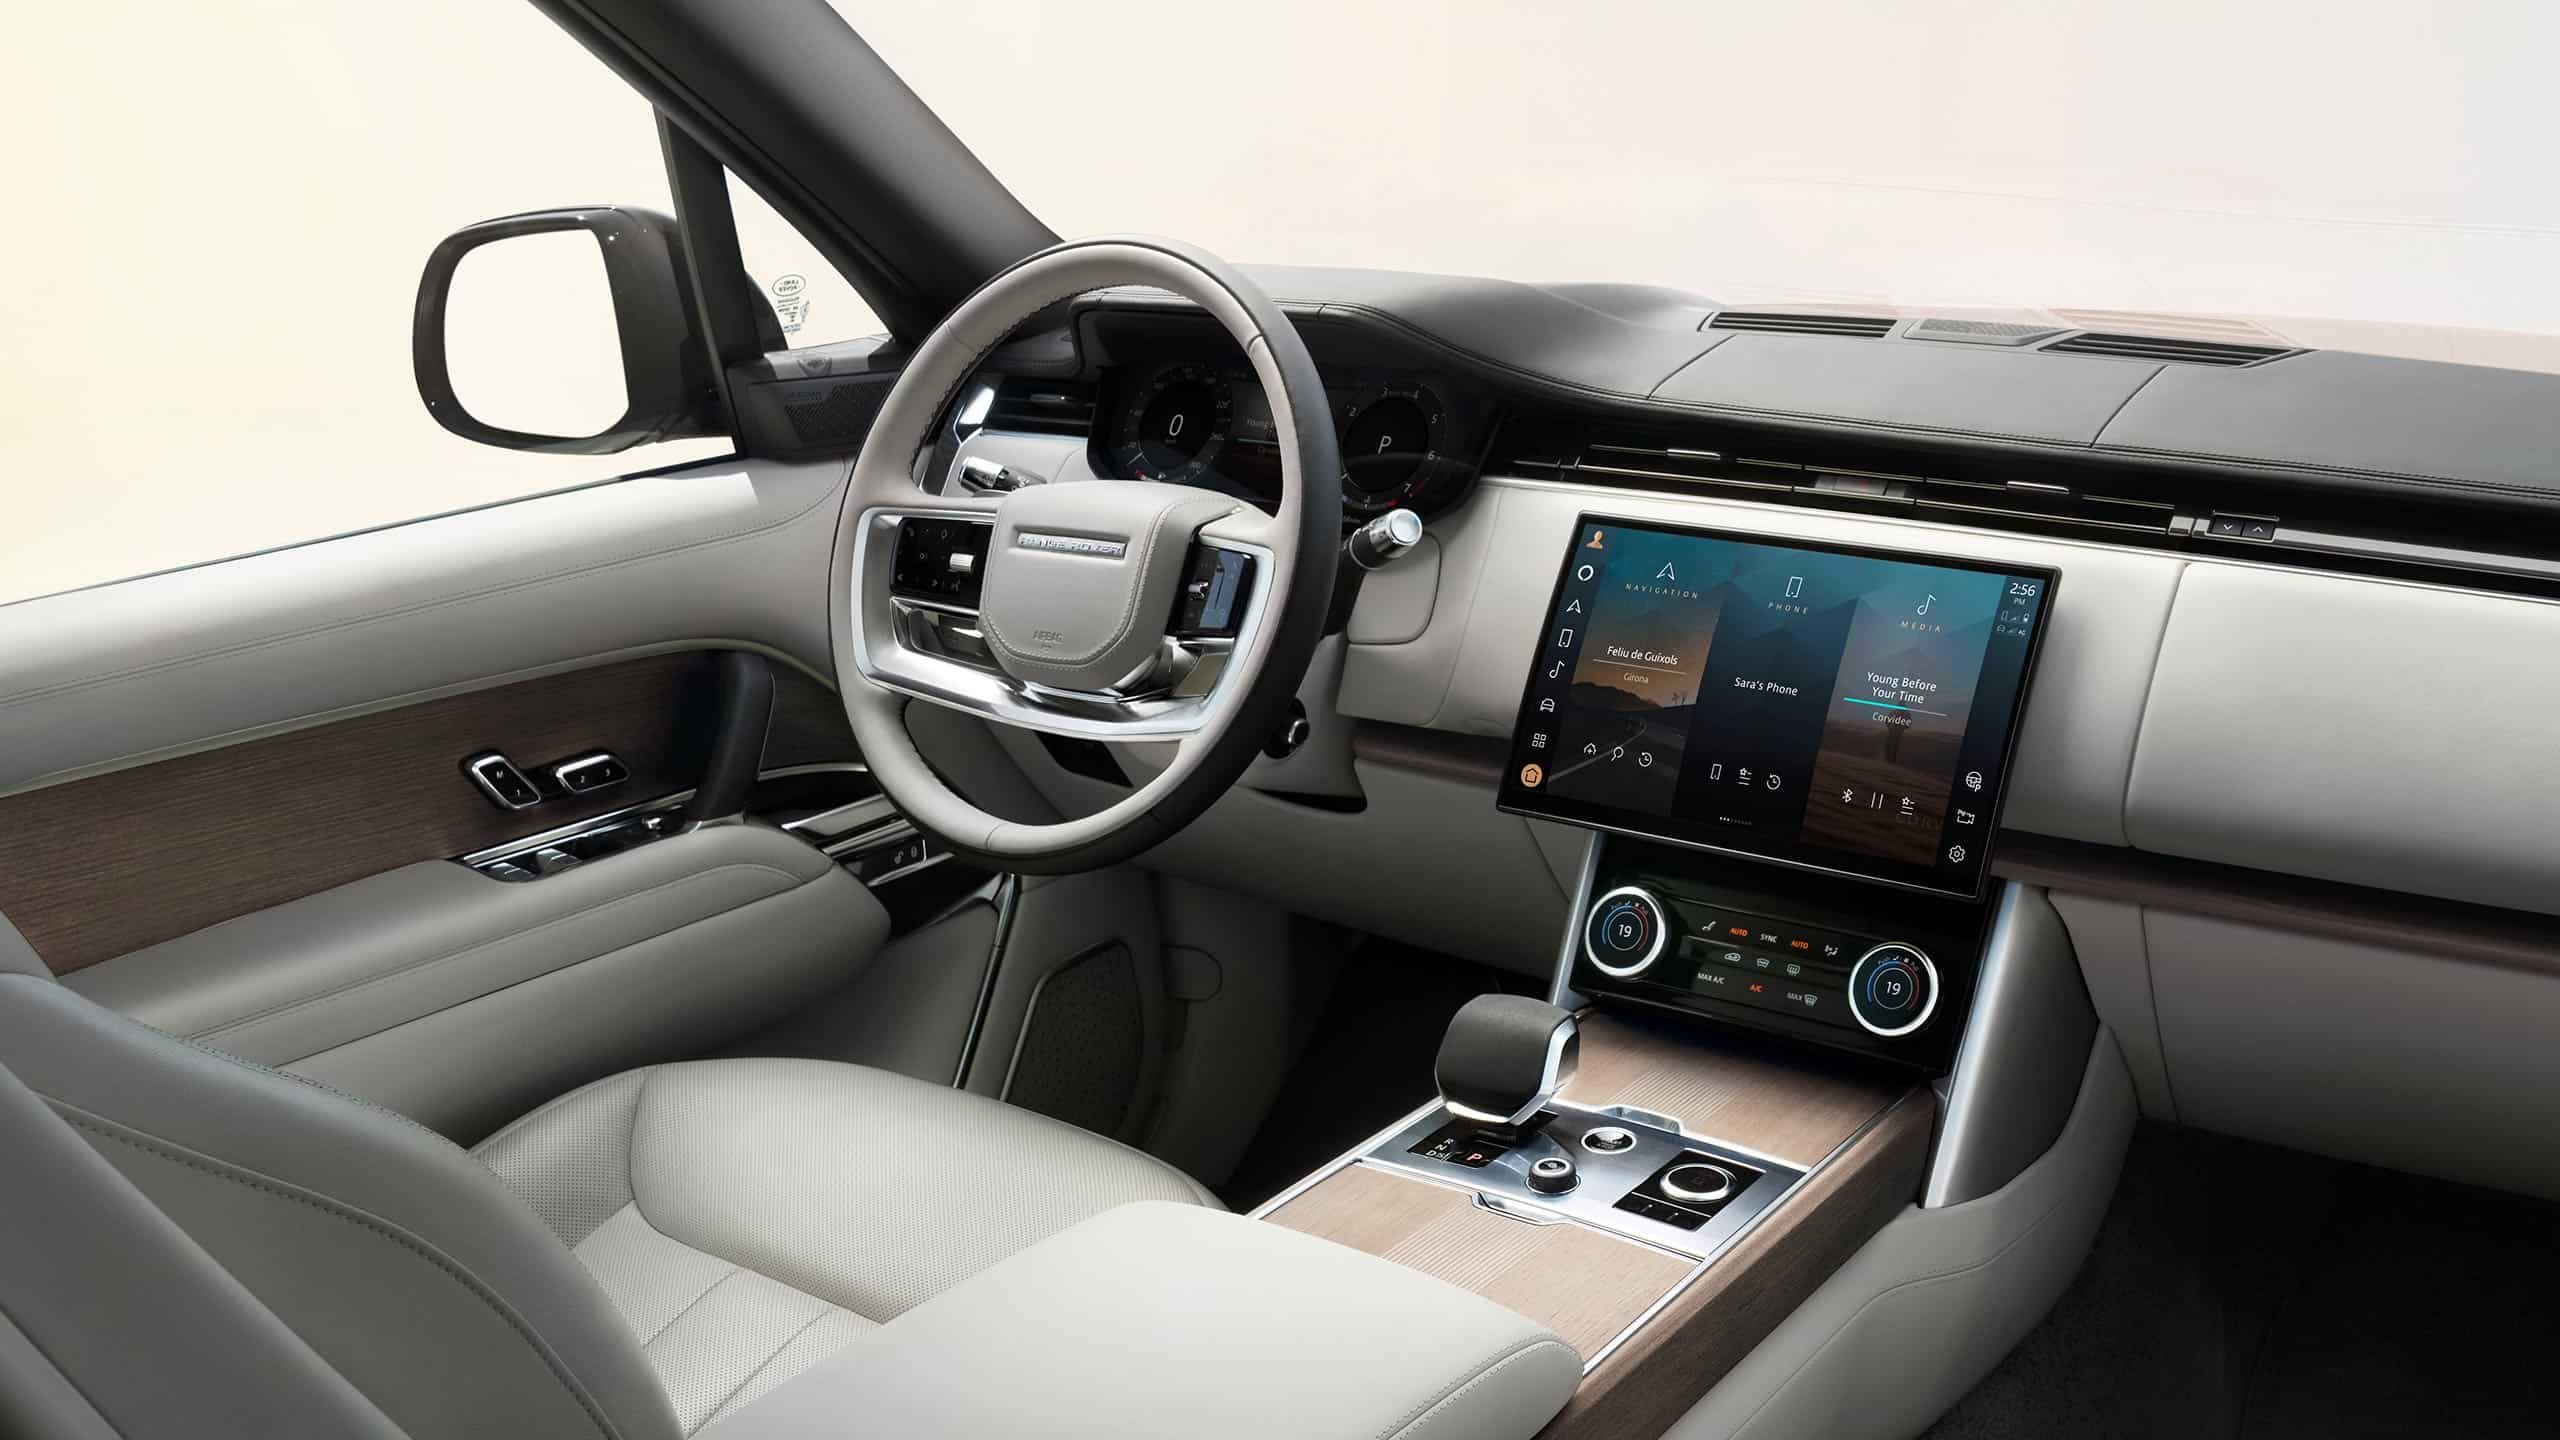 New Range Rover interior front view